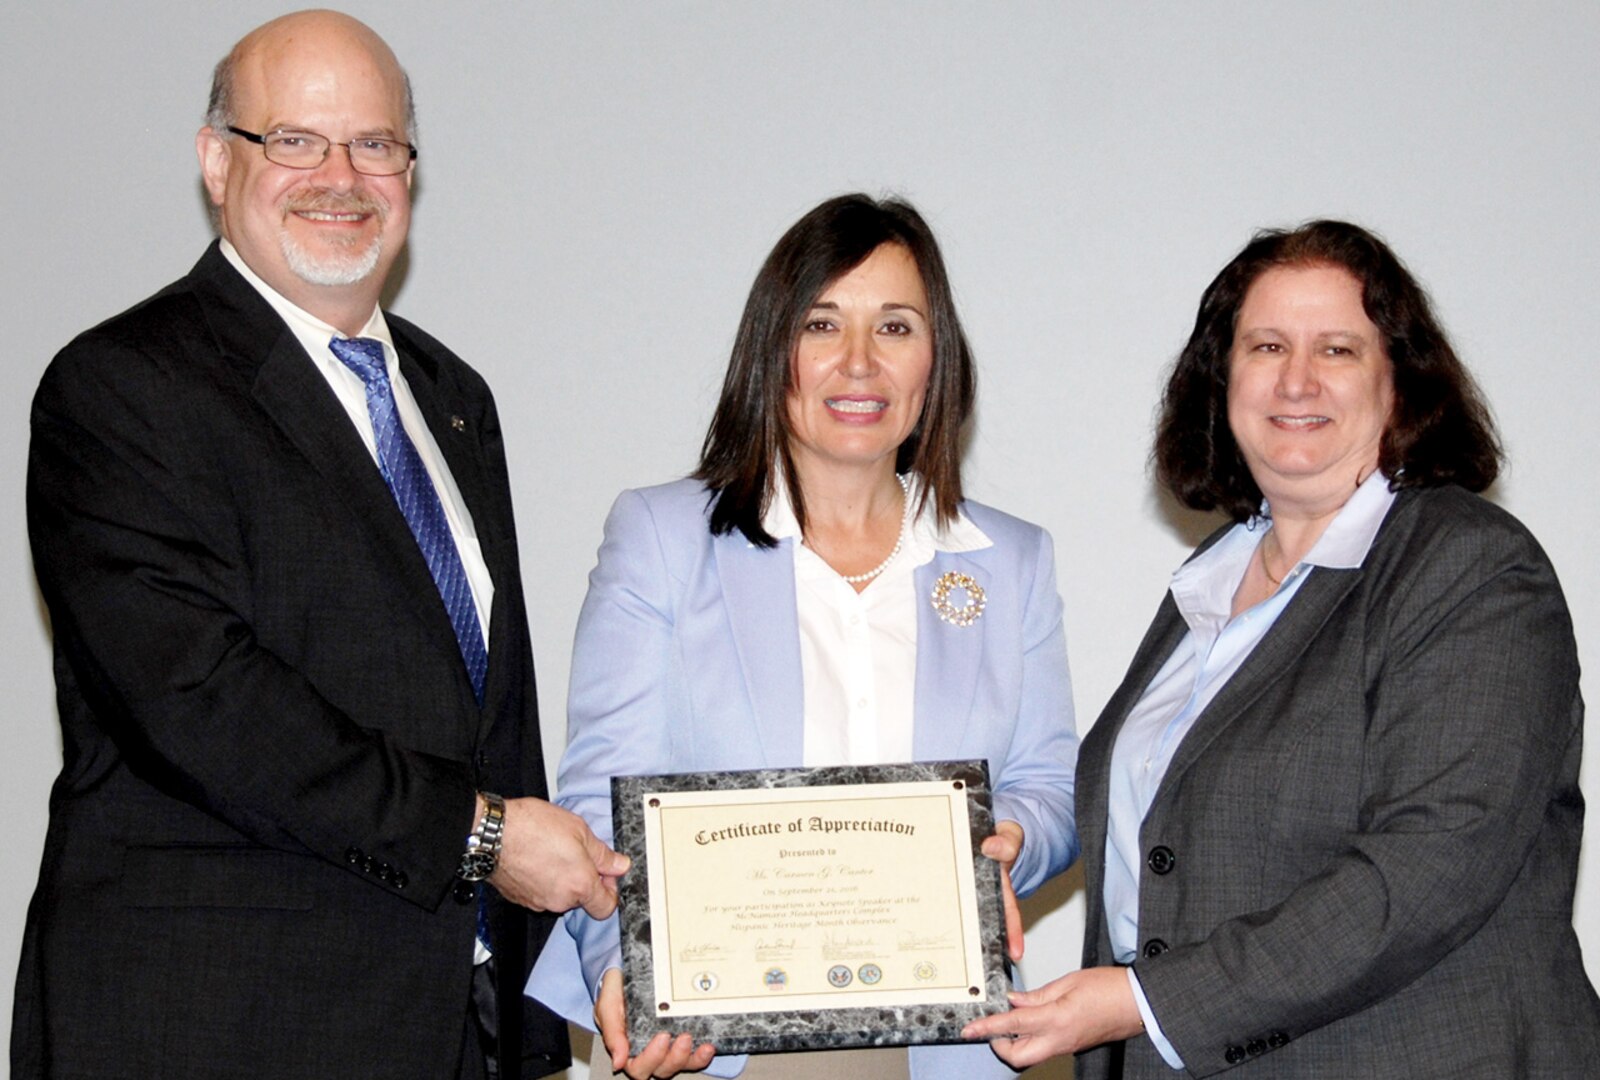 Philip Hepperle (left), director of equal employment opportunity for the Defense Contract Audit Agency, and DCAA Director Anita Bales (right) present a certificate of appreciation to Carmen Cantor (center), director of Ccivil Sservice human resource management for the U.S. State Department.